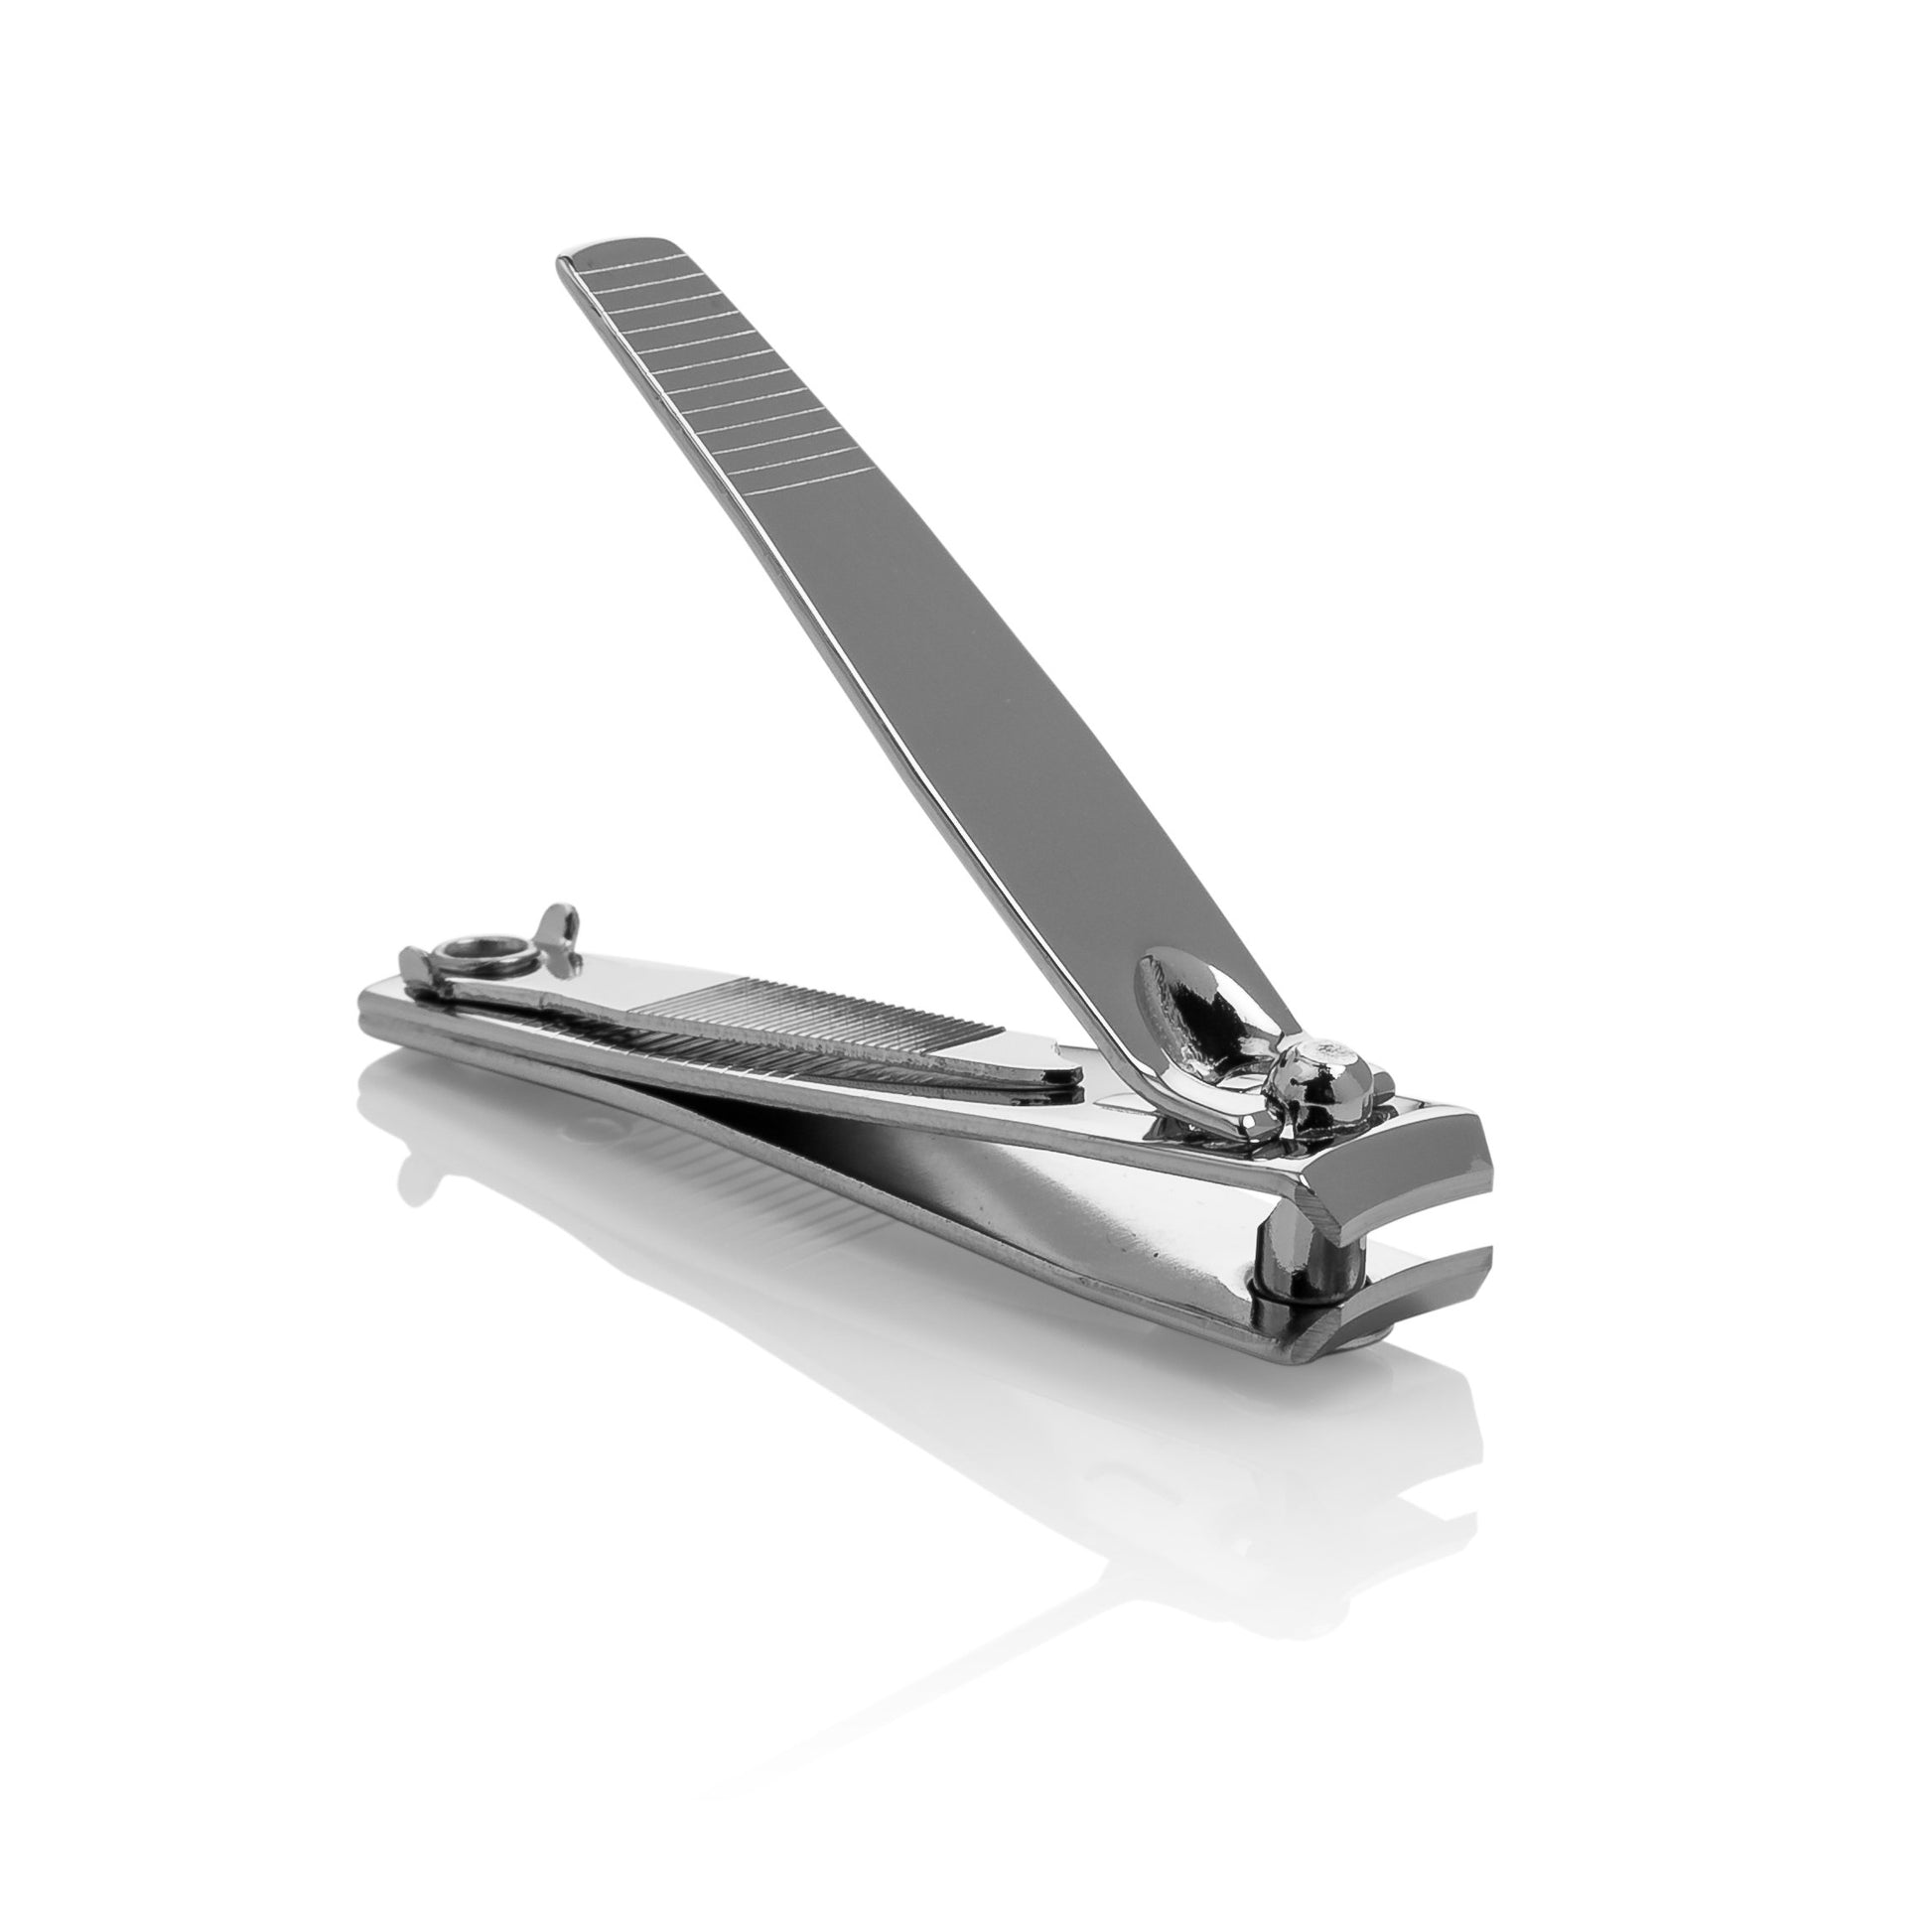 high quality stainless steel nail clipper